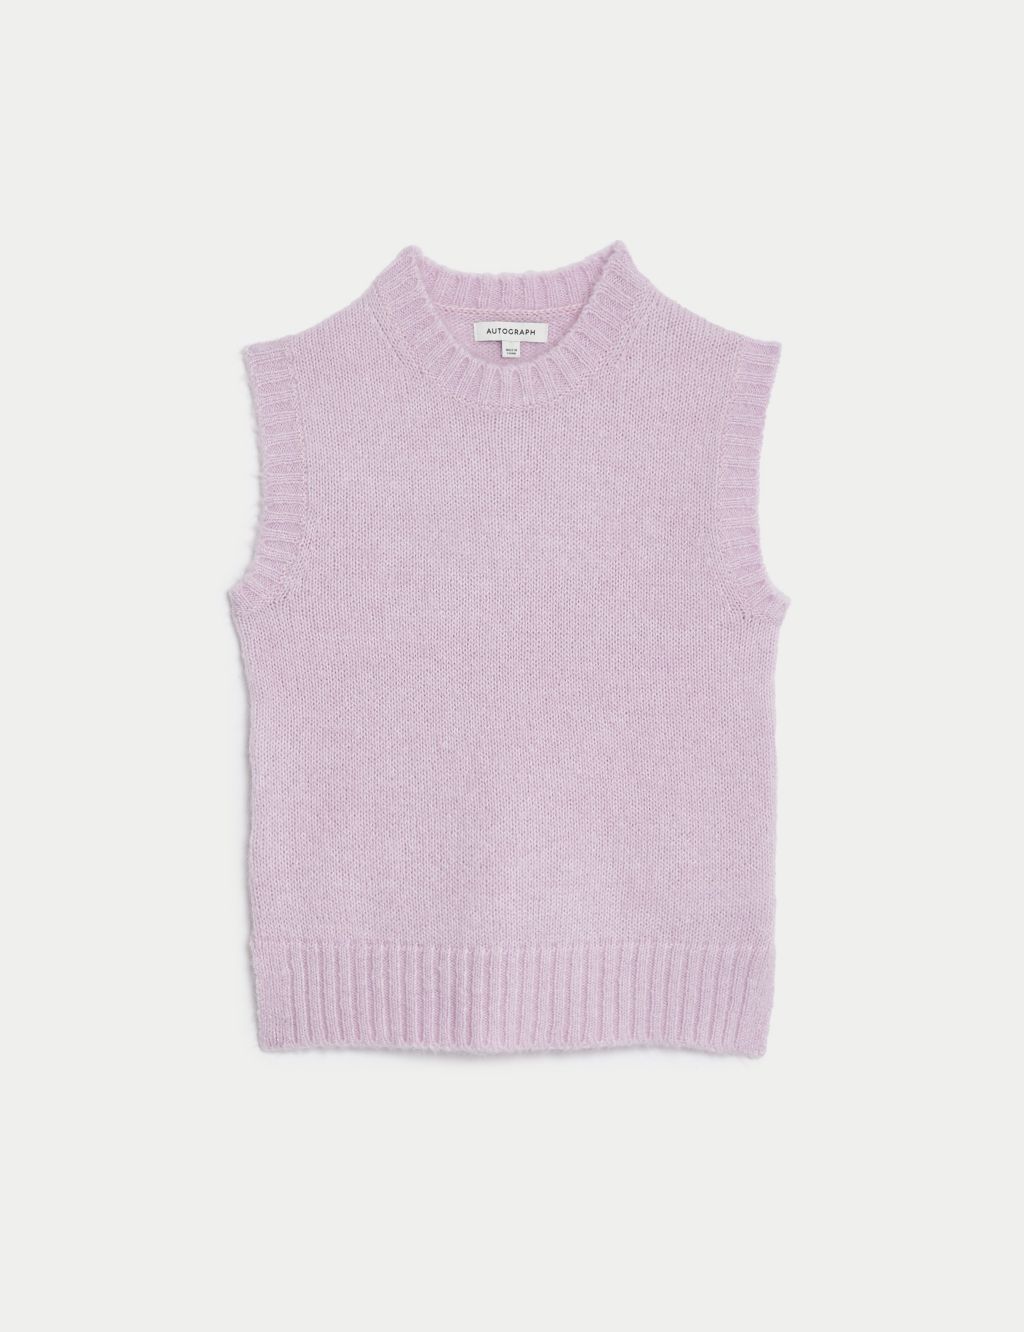 Crew Neck Knitted Jumper Vest with Mohair image 2